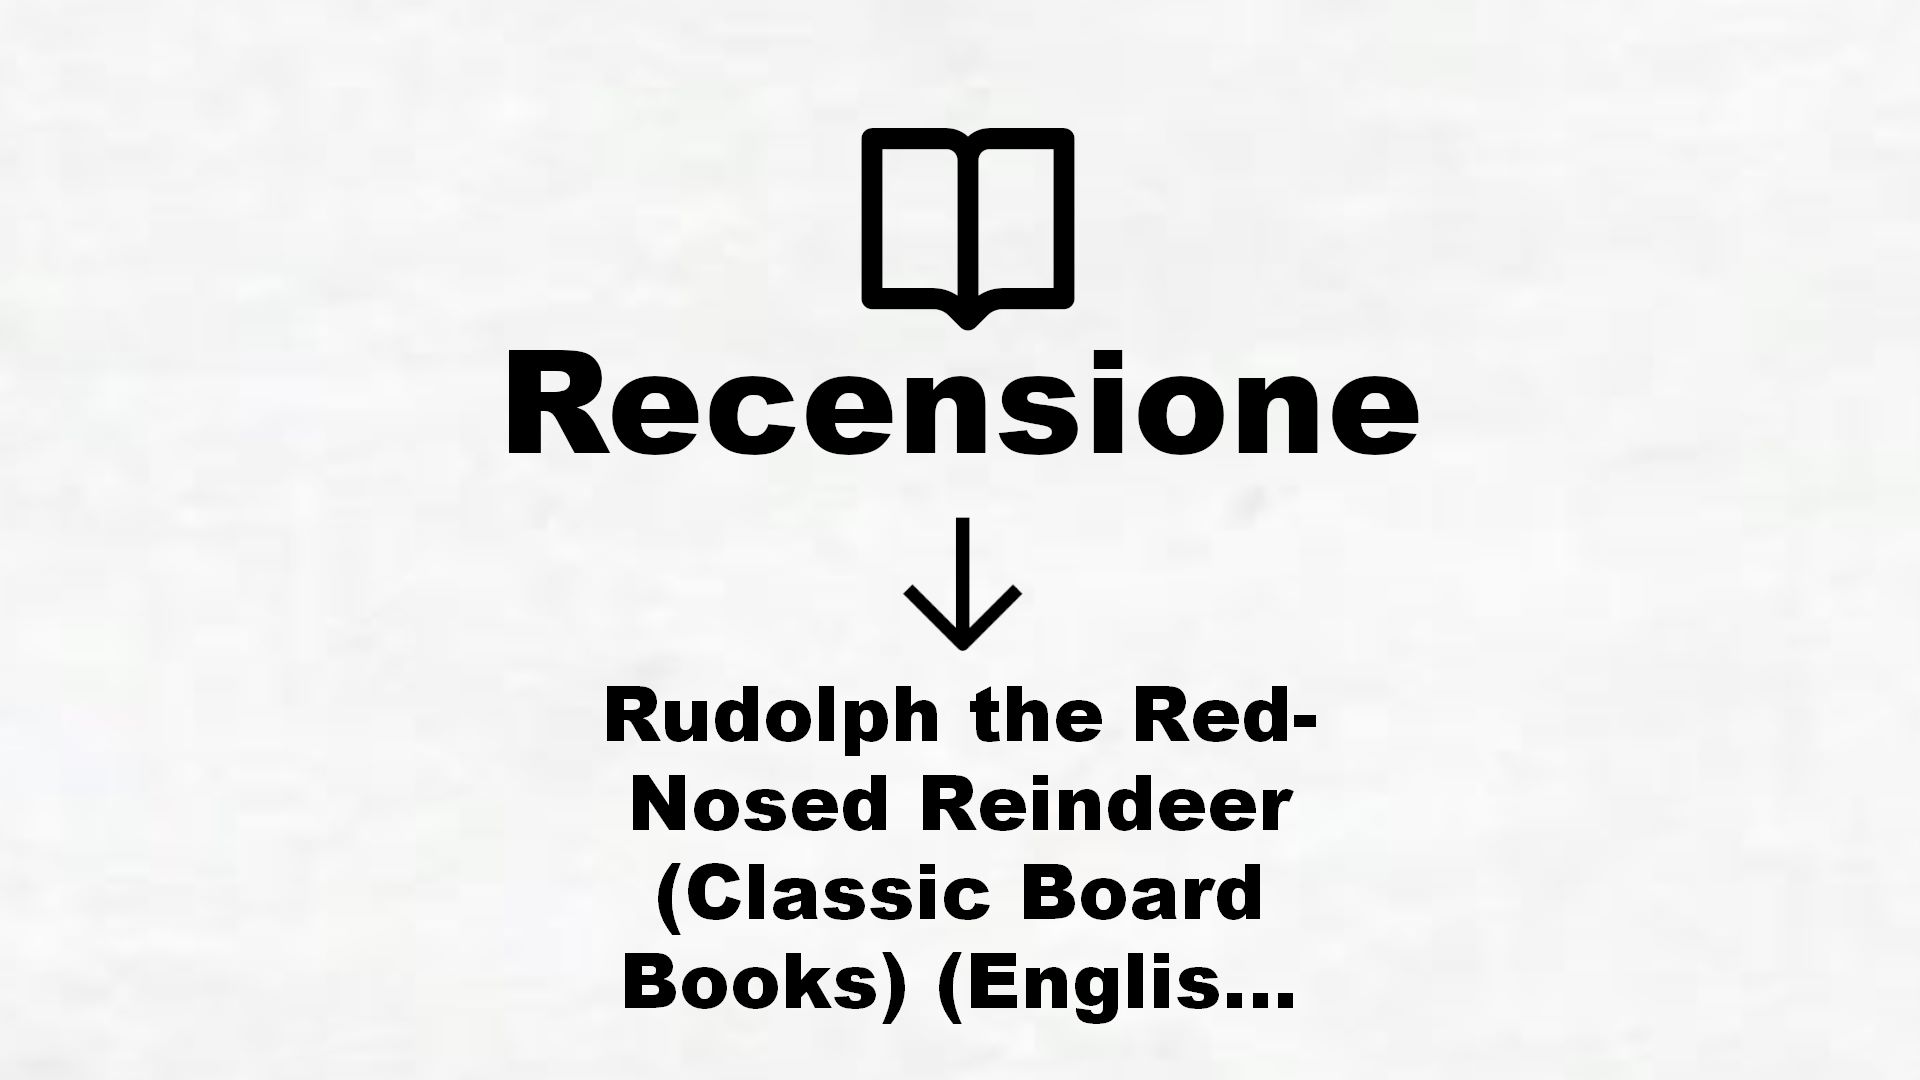 Rudolph the Red-Nosed Reindeer (Classic Board Books) (English Edition) – Recensione Libro